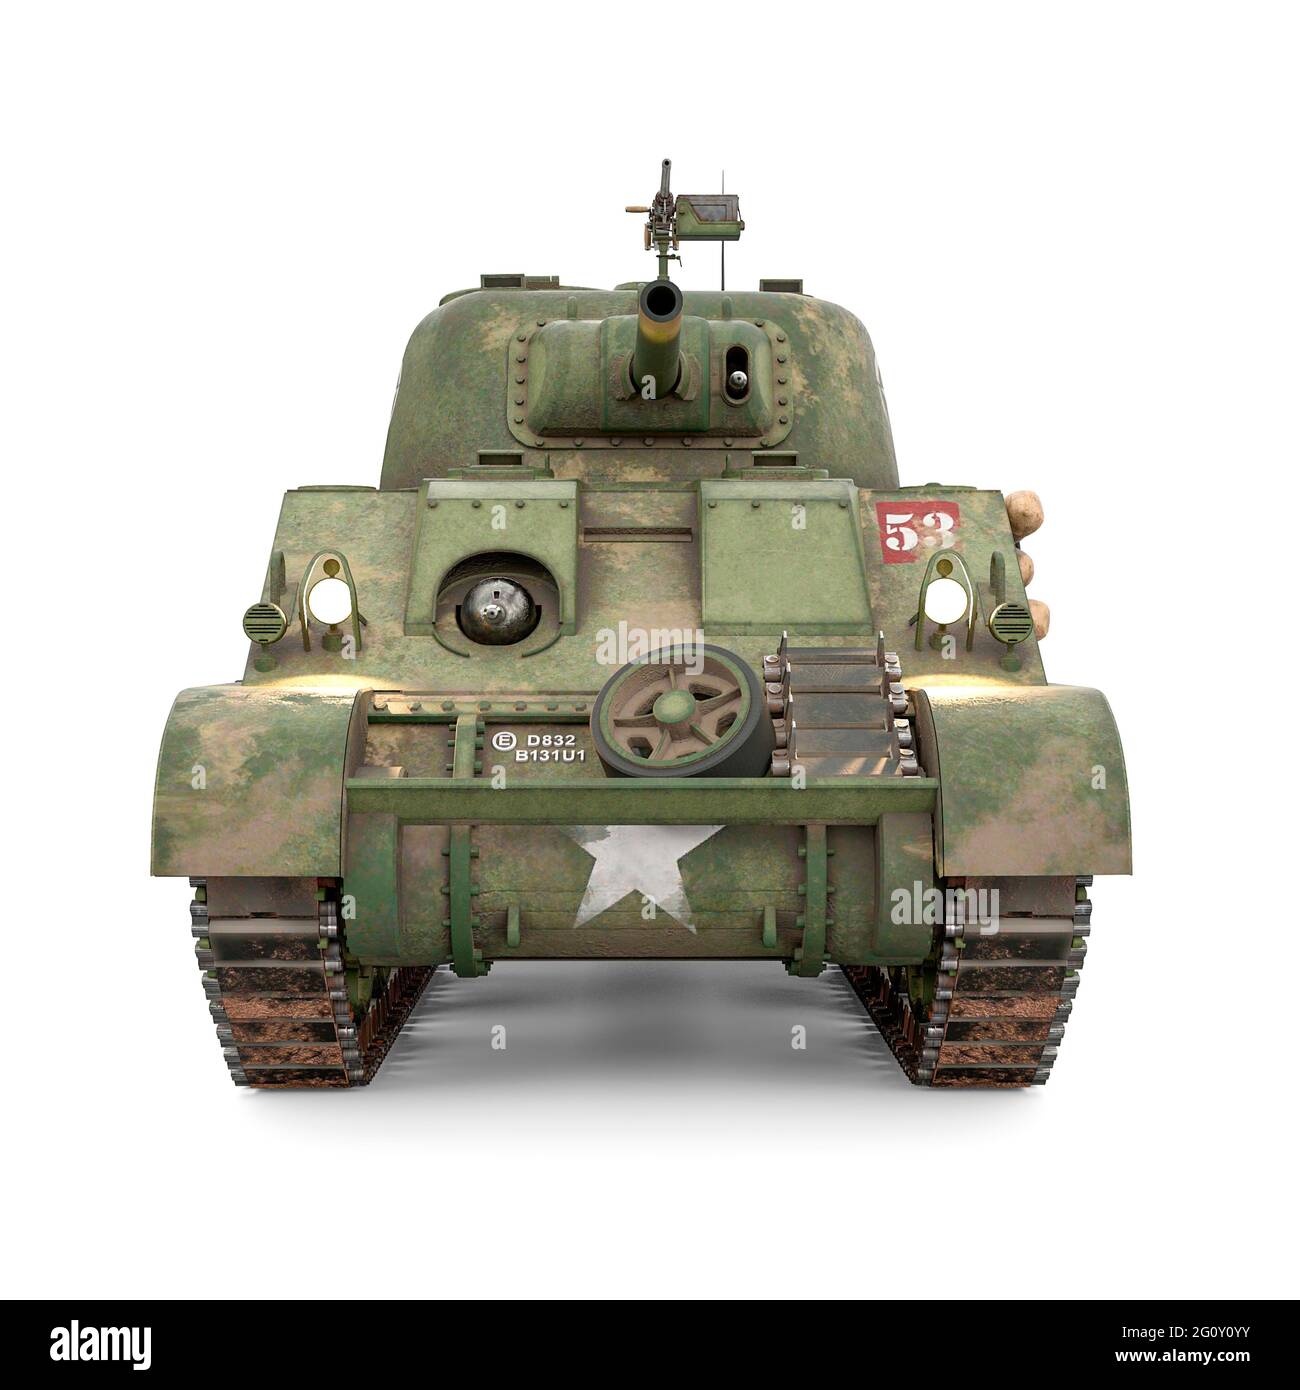 1,650 Army Tank Front View Images, Stock Photos, 3D objects, & Vectors